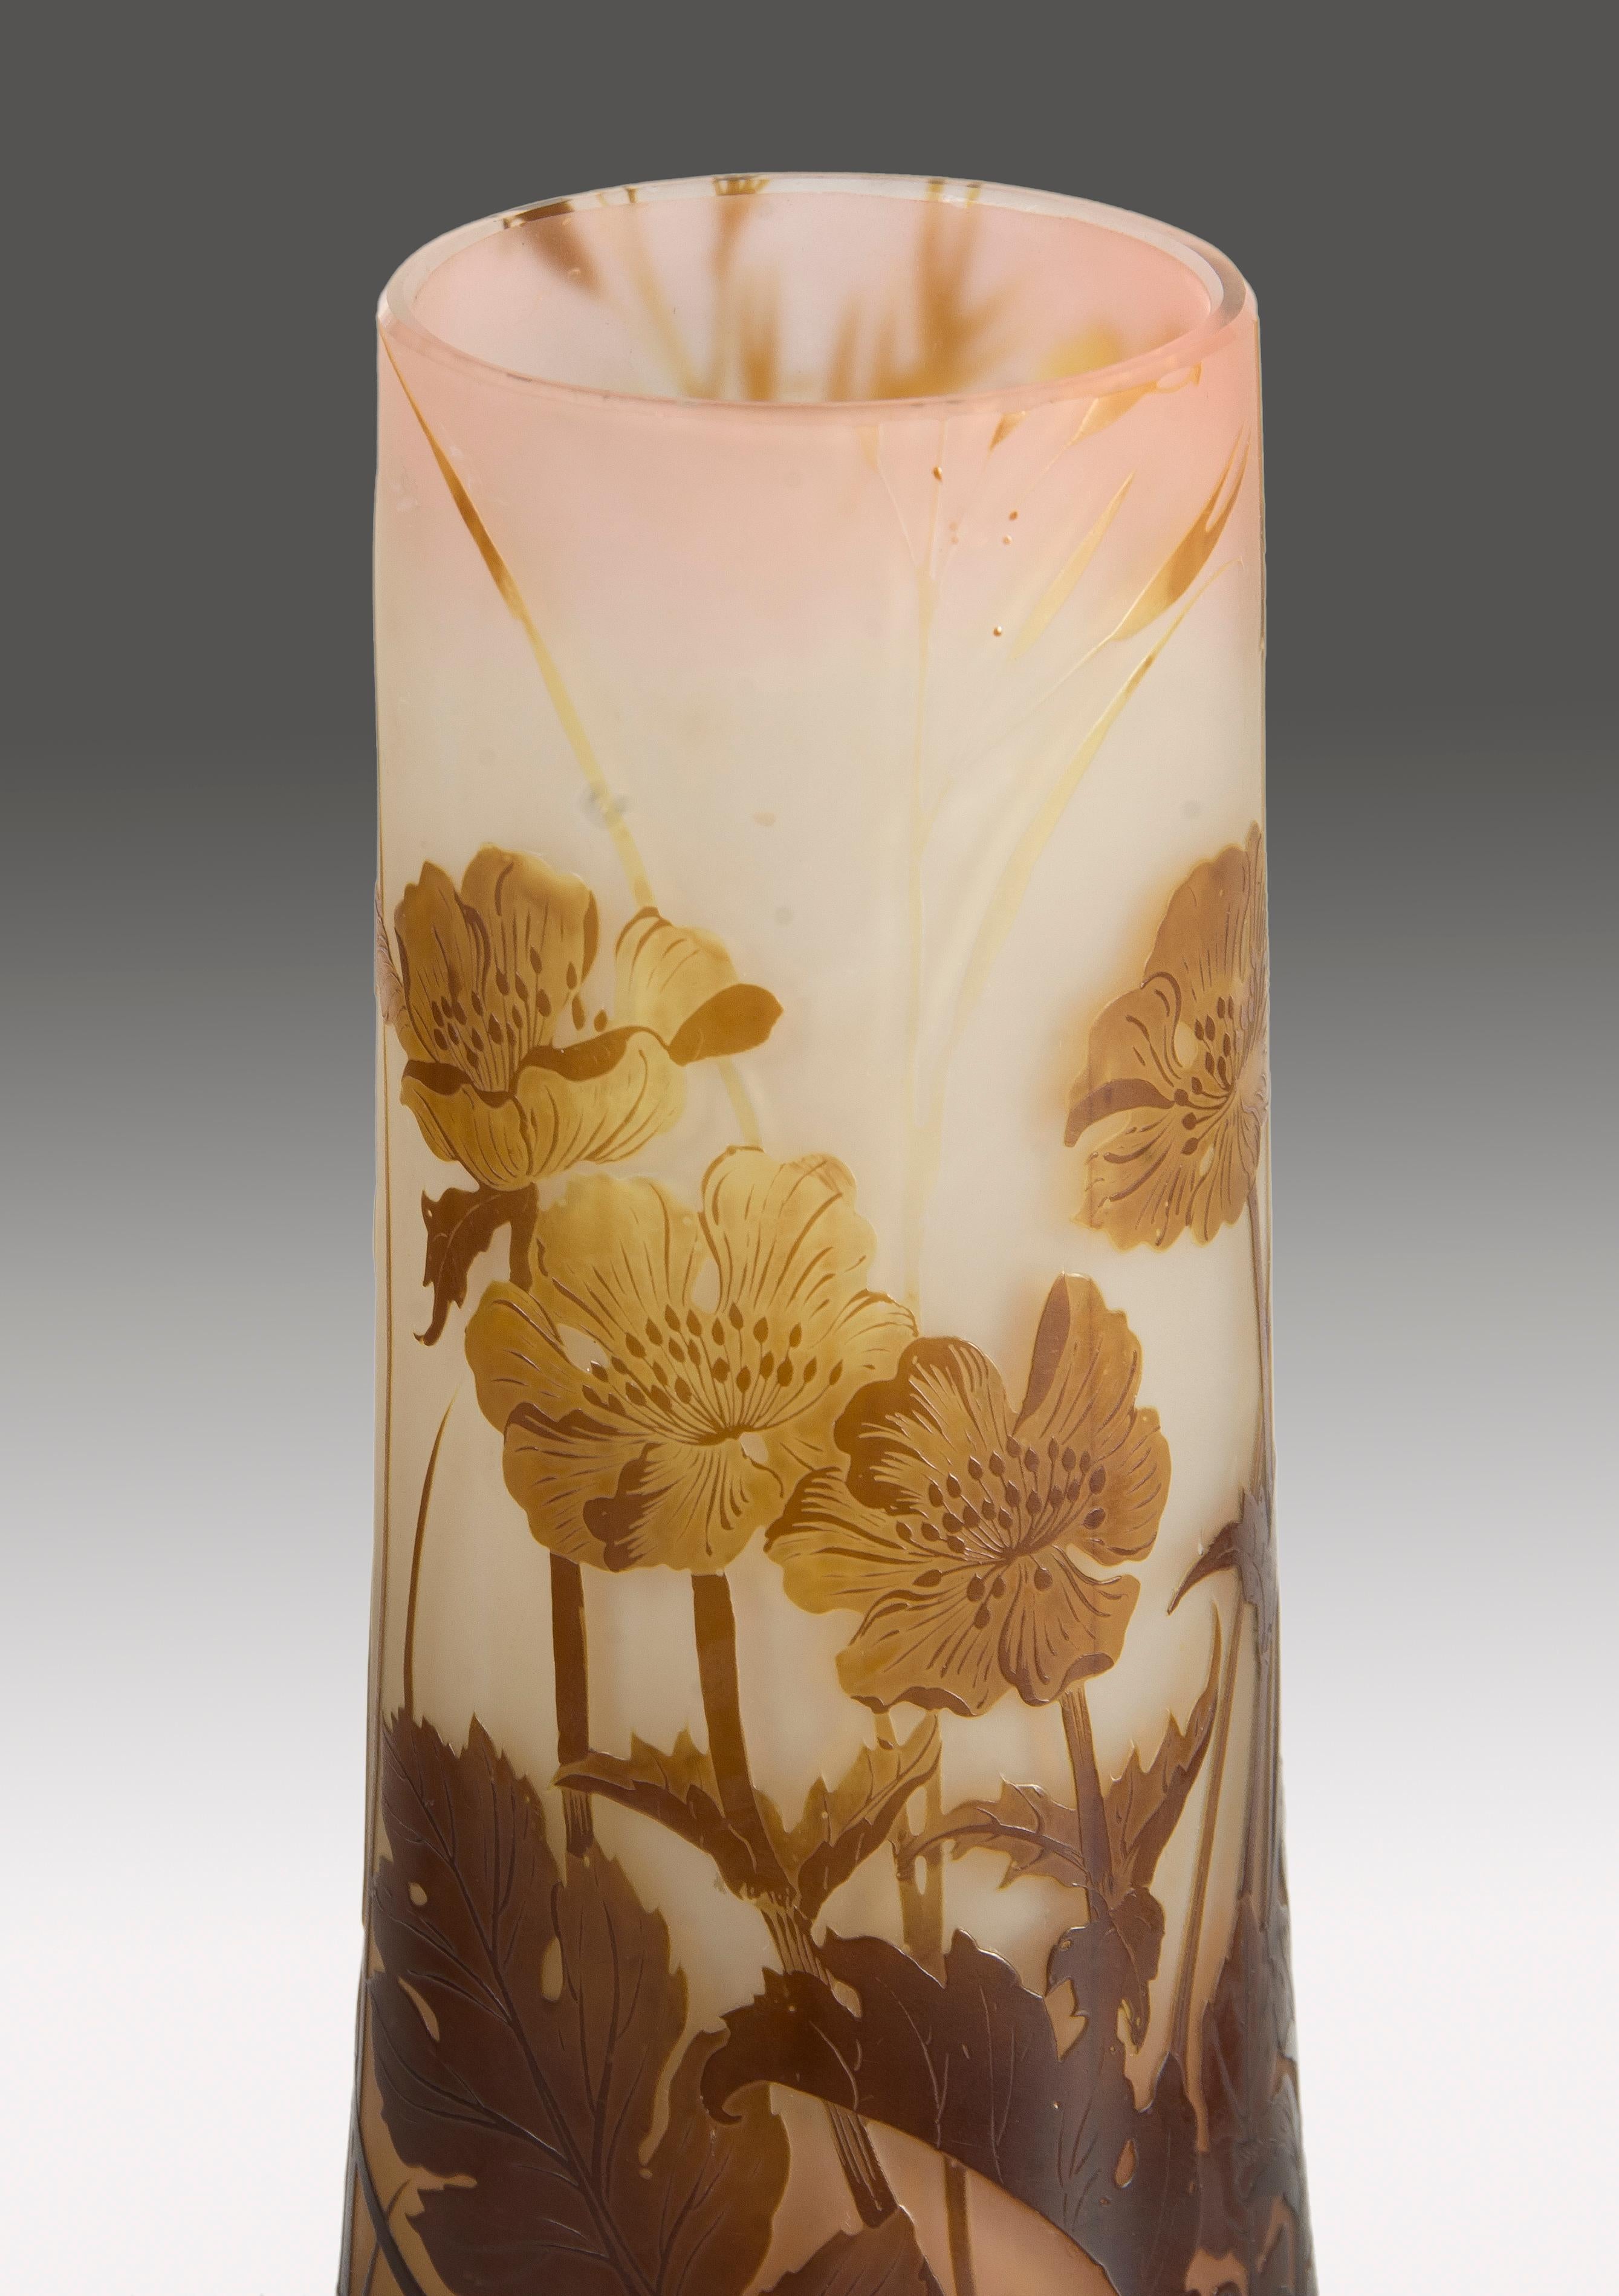 Vase. Glass. Following models by Émile Gallé (Nancy, 1846-1904).
Vase made of glass, with white, brown and goldstones, following both in technique and decoration the well-known Art Nouveau works of Émille Gallé, an artist internationally recognized